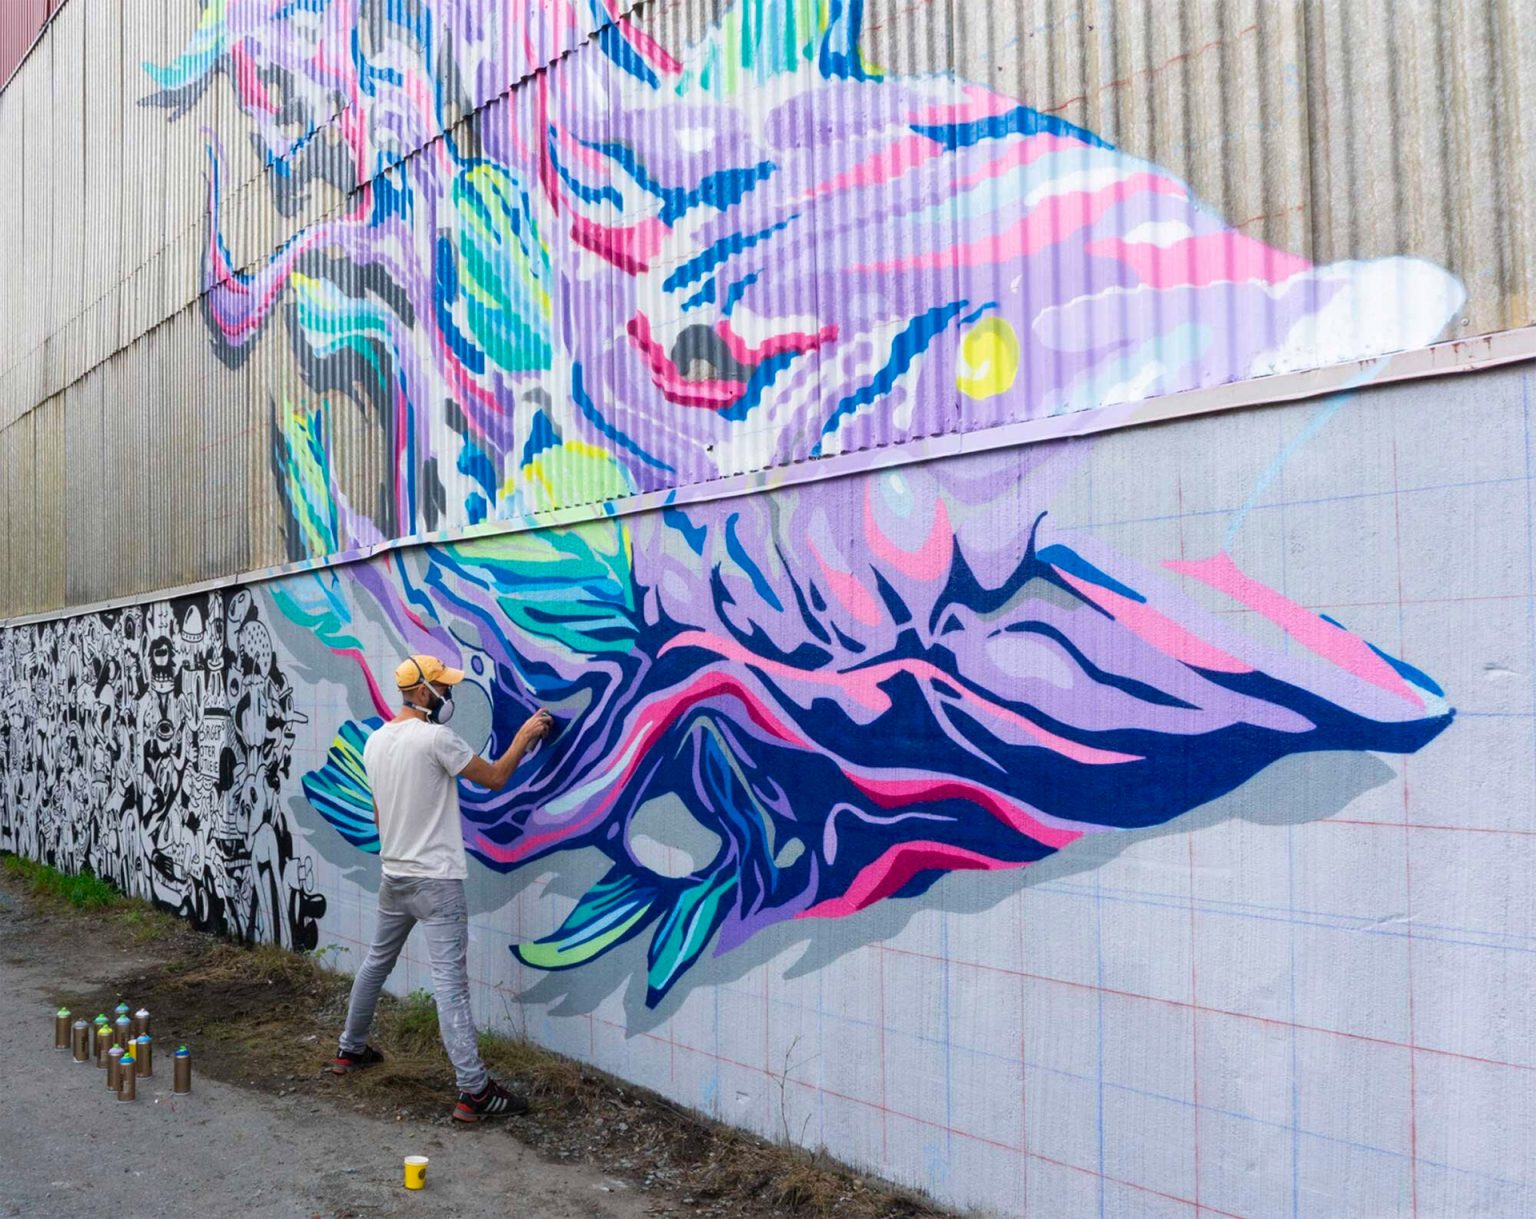 Colorful Murals & Street Art by Skurktur | Daily design inspiration for ...